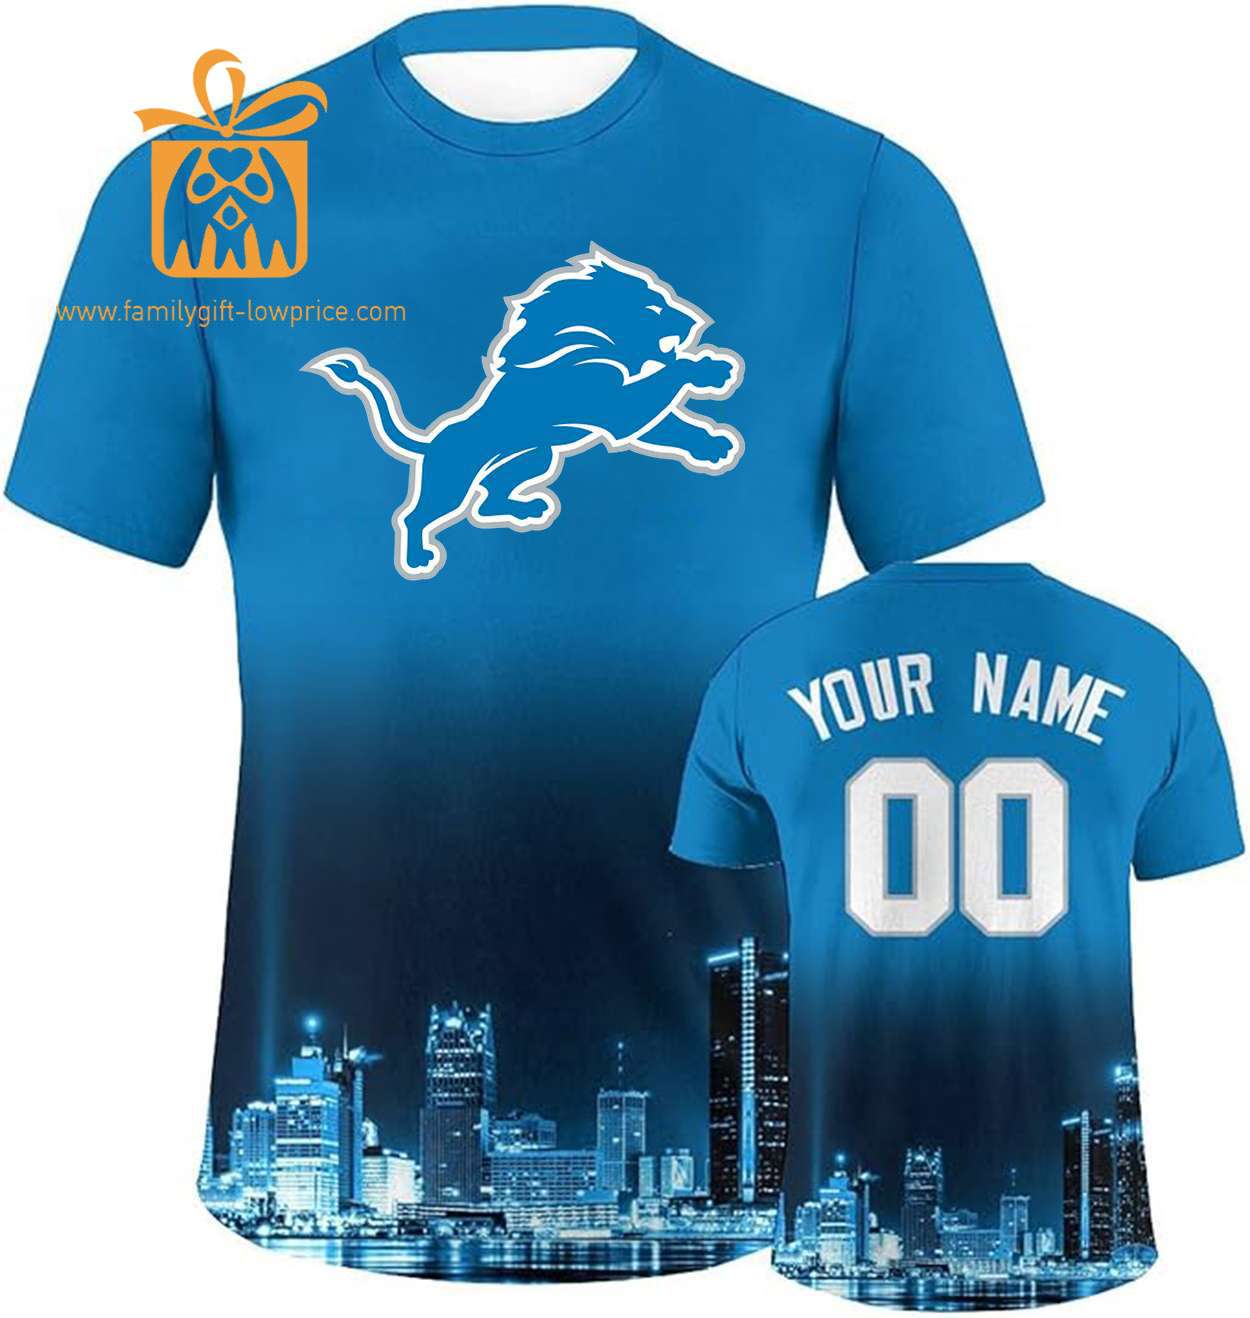 Detroit Lions Custom Football Shirts – Personalized Name & Number, Ideal for Fans